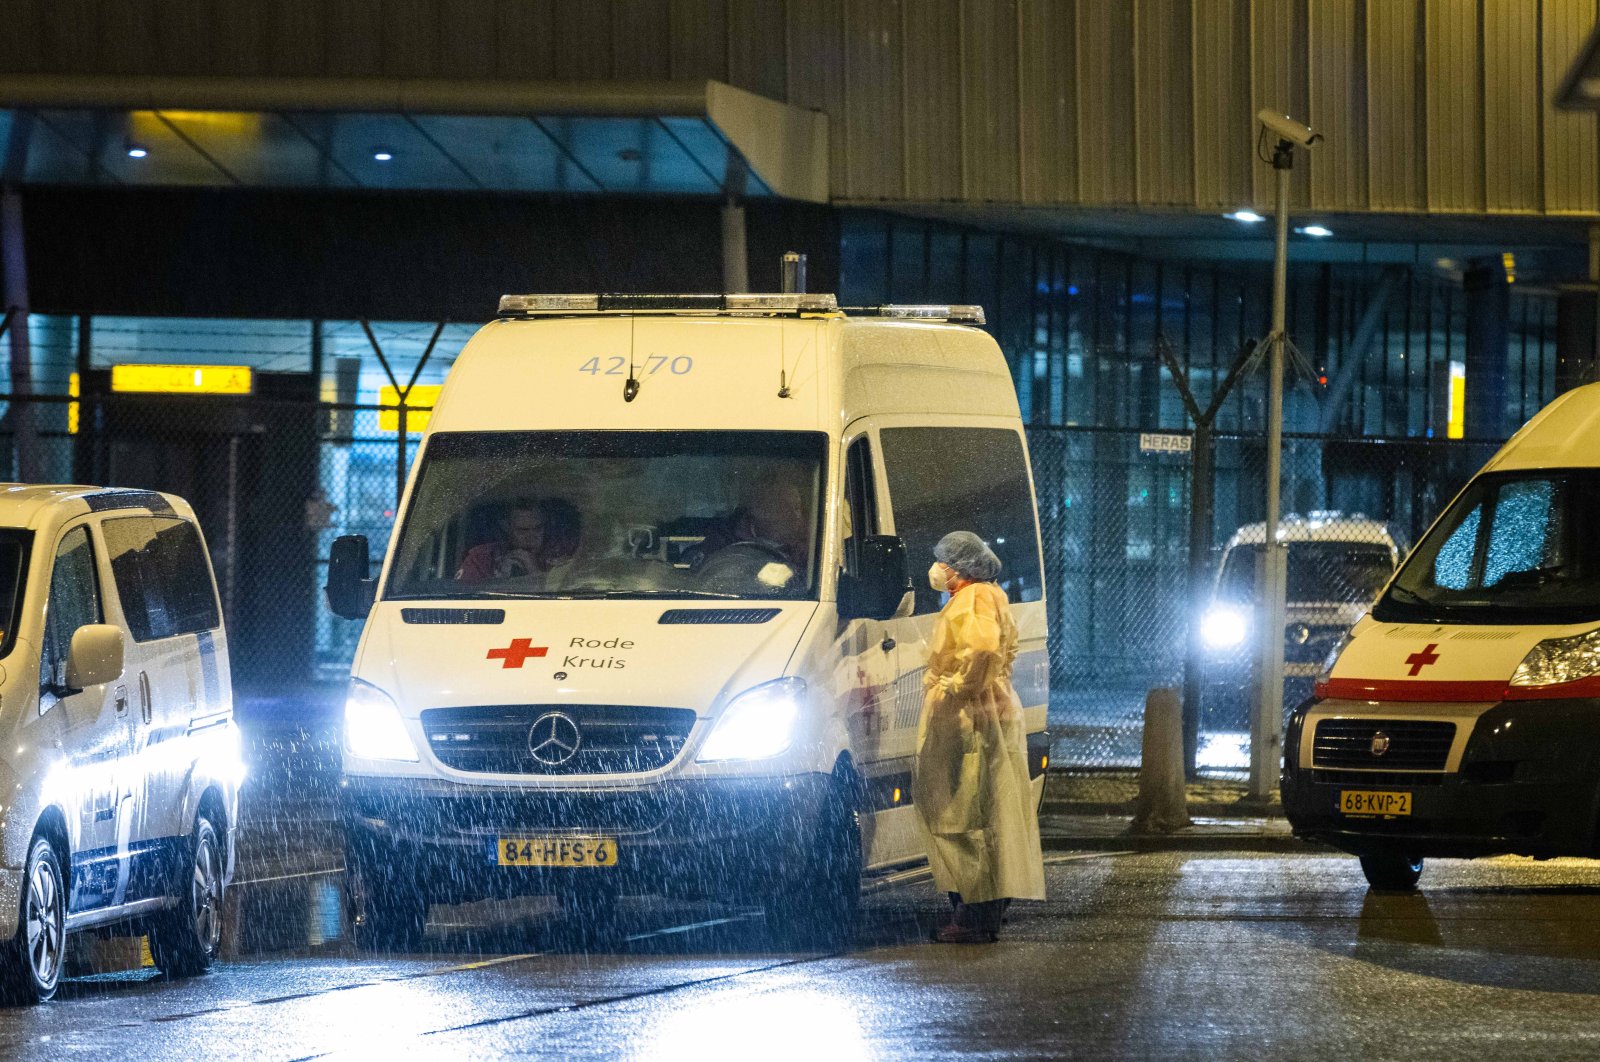 Health workers of the Red Cross transport passengers infected with coronavirus returning from South Africa, for quarantine in a hotel, in Schiphol, the Netherlands, Nov. 27, 2021. (EPA Photo)